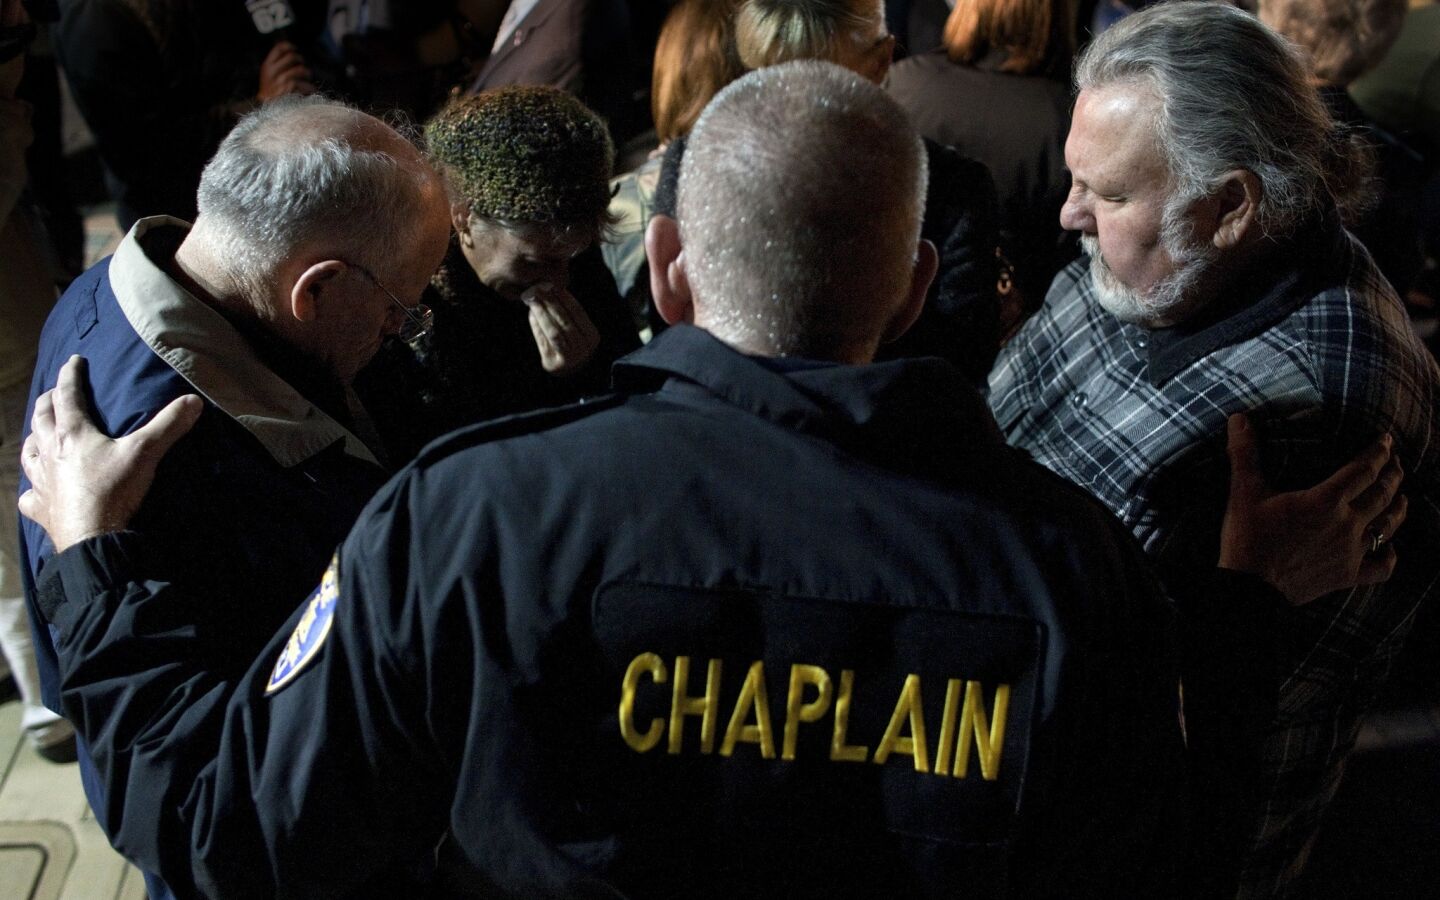 Riverside Police Chaplain Steve Ballinger comforts residents during a vigil at City Hall for the slain and wounded Riverside police officers.